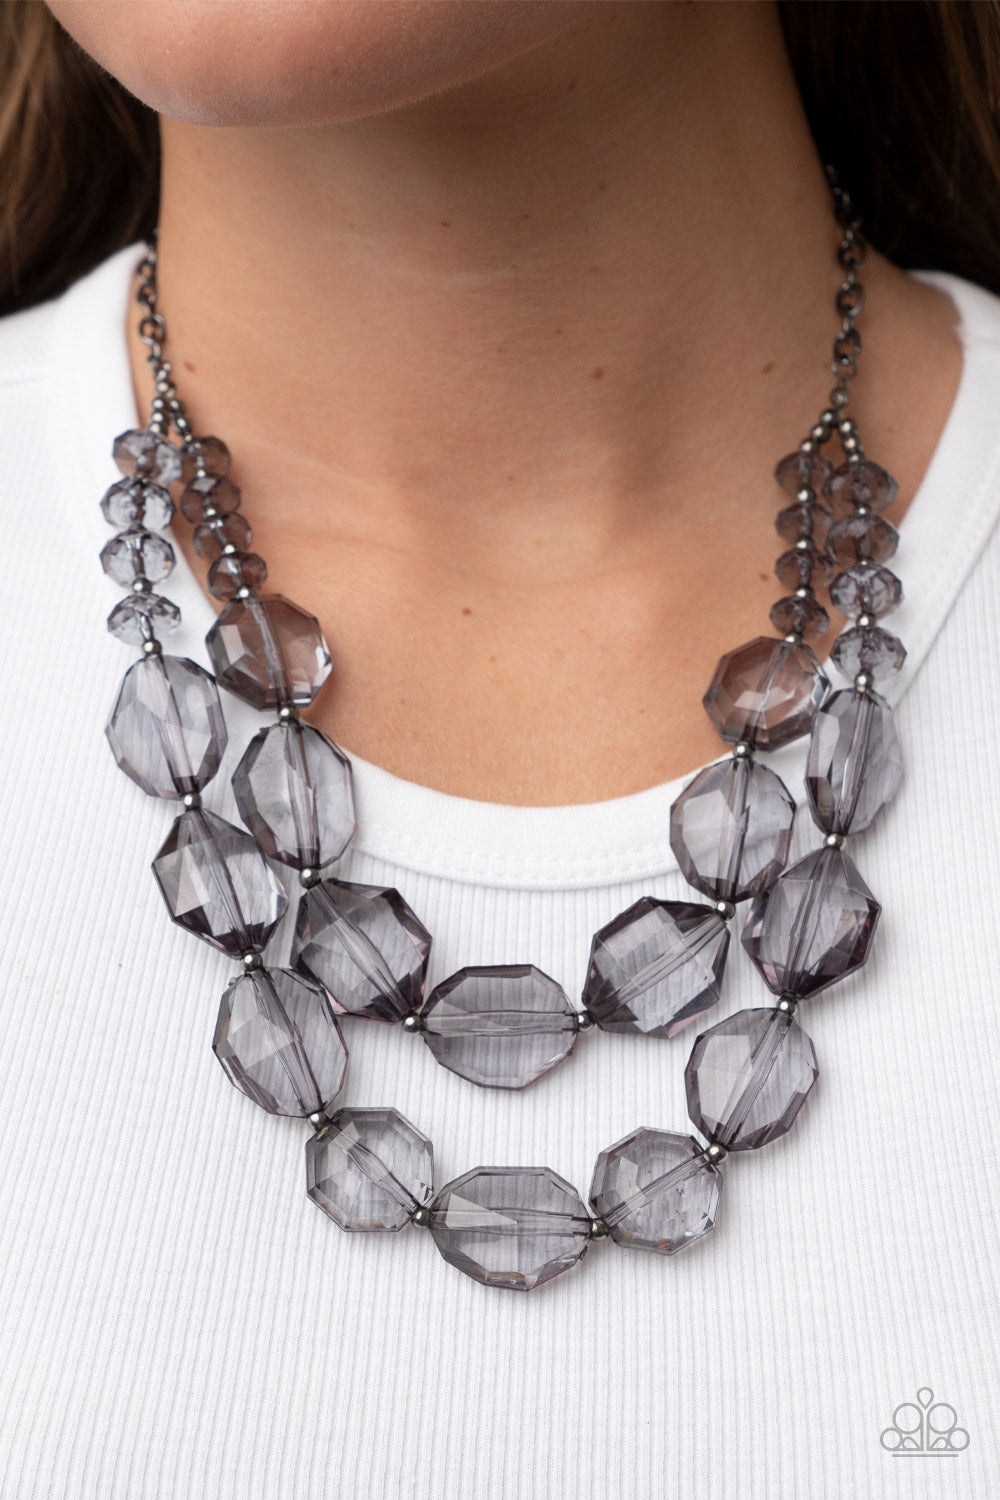 Icy Illumination Paparazzi Accessories Necklace with Earrings Black